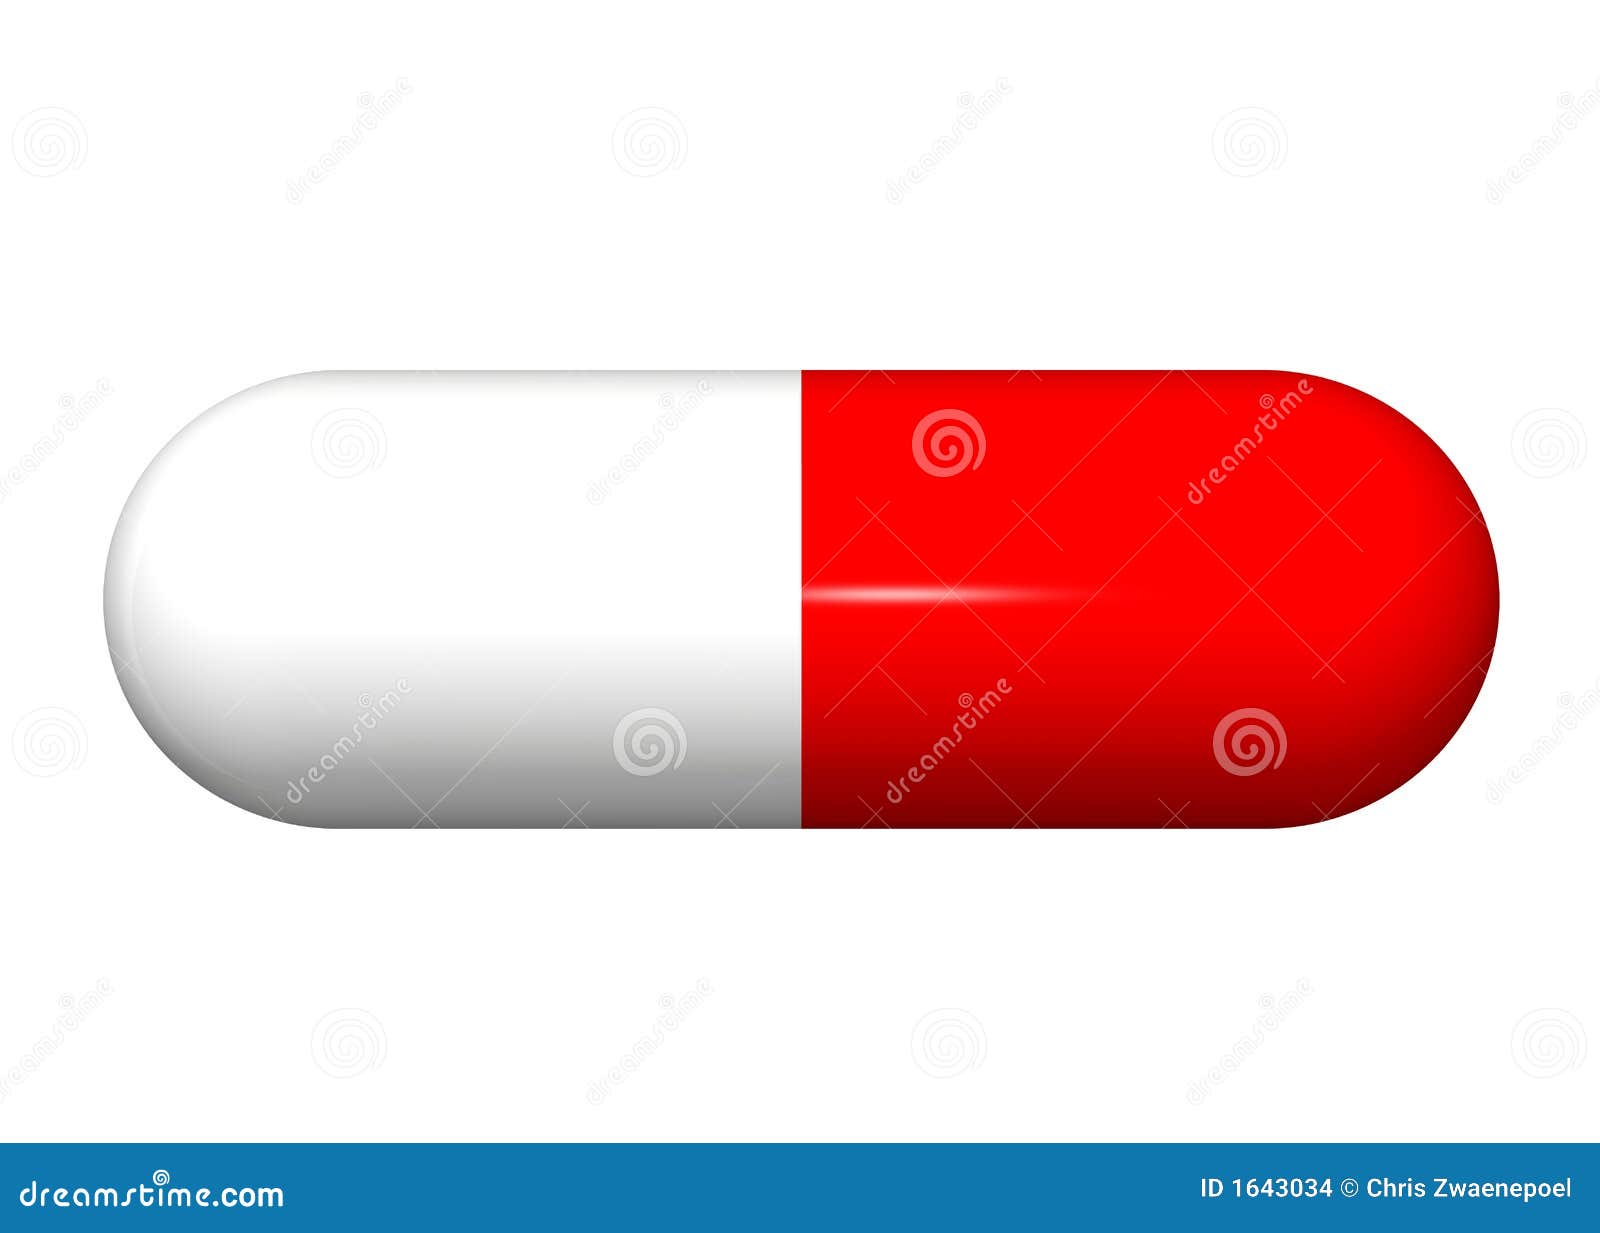 Single Red And White Pill Stock Images - Image: 1643034